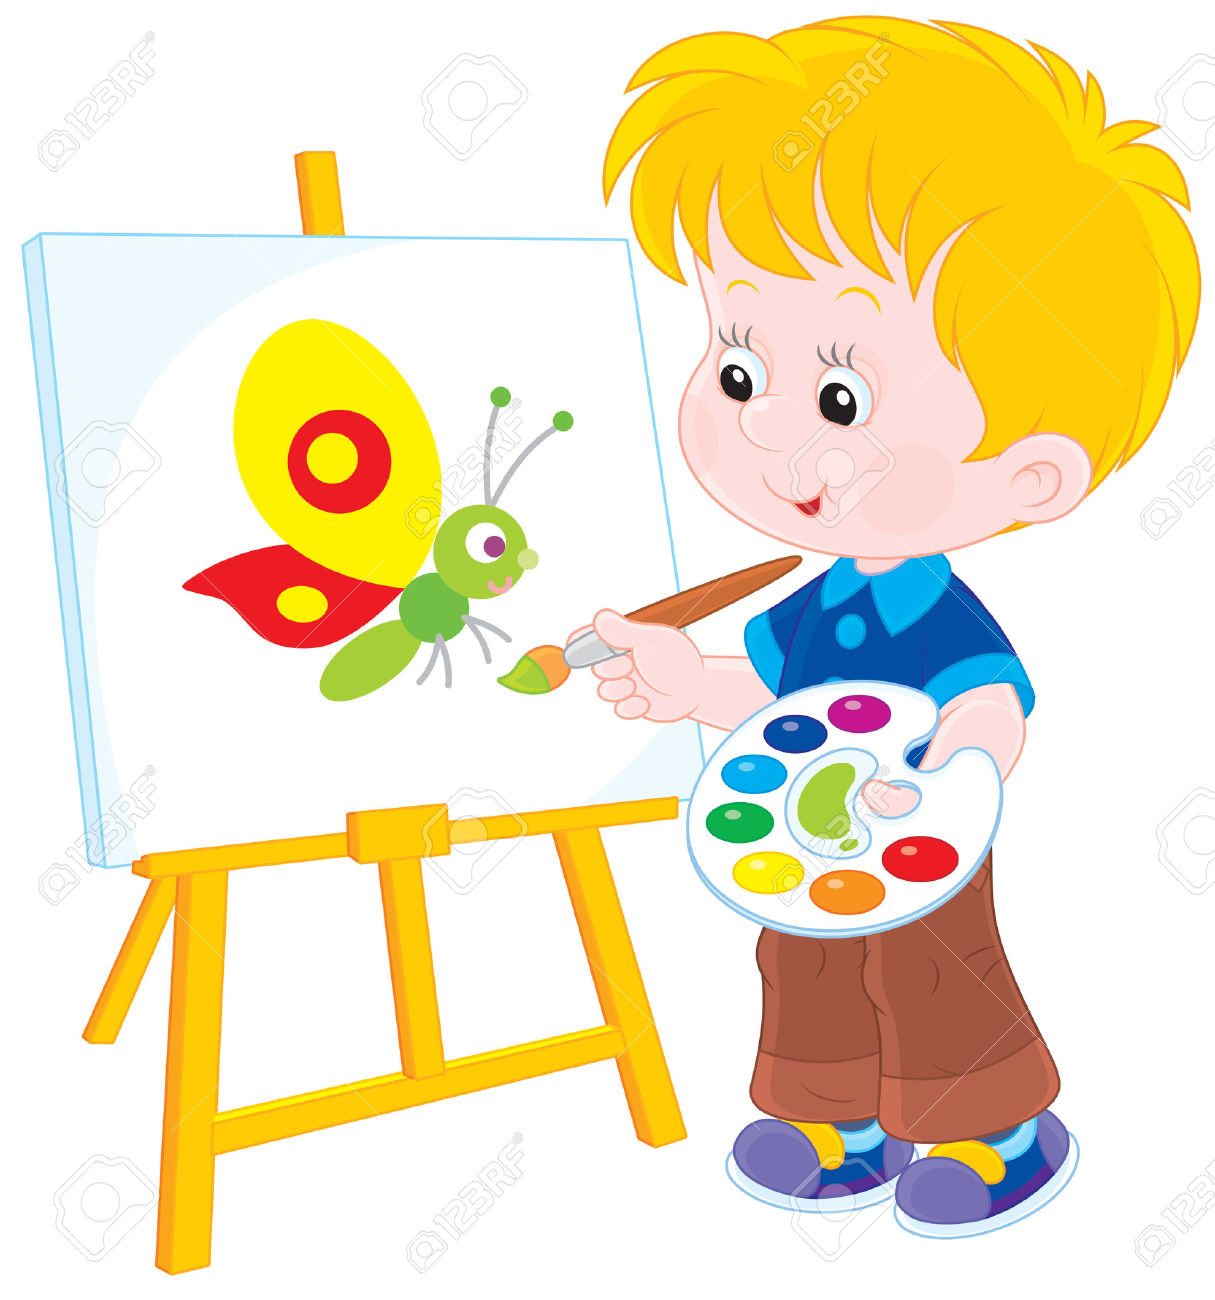 Illustration painting clipart - Clipground